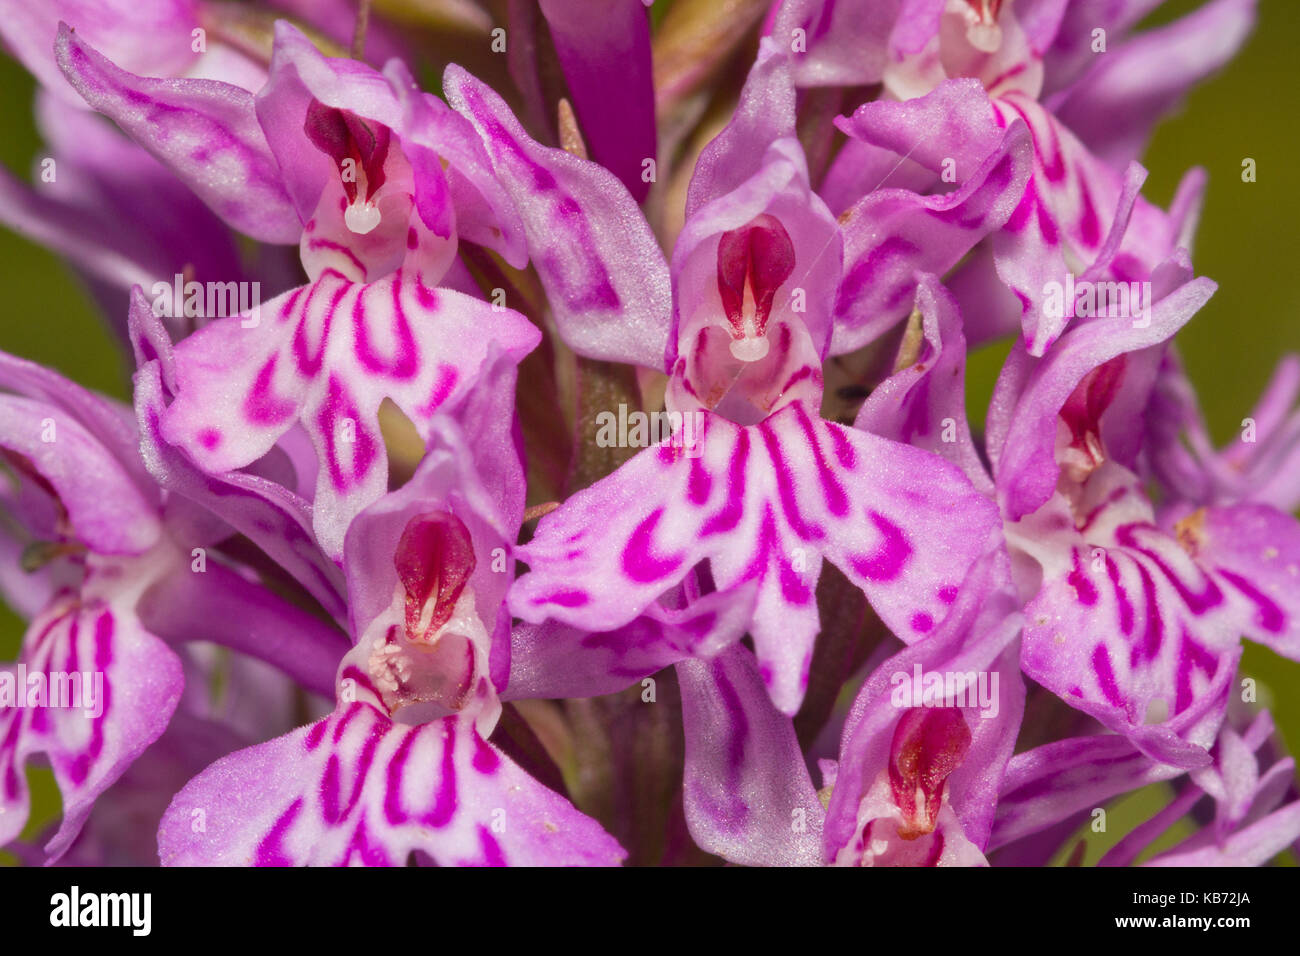 Close-up of flower head of Common Spotted Orchid (Dactylorhiza fuchsii) showing individual flowers, United Kingdom, Devon, Orley Common Stock Photo